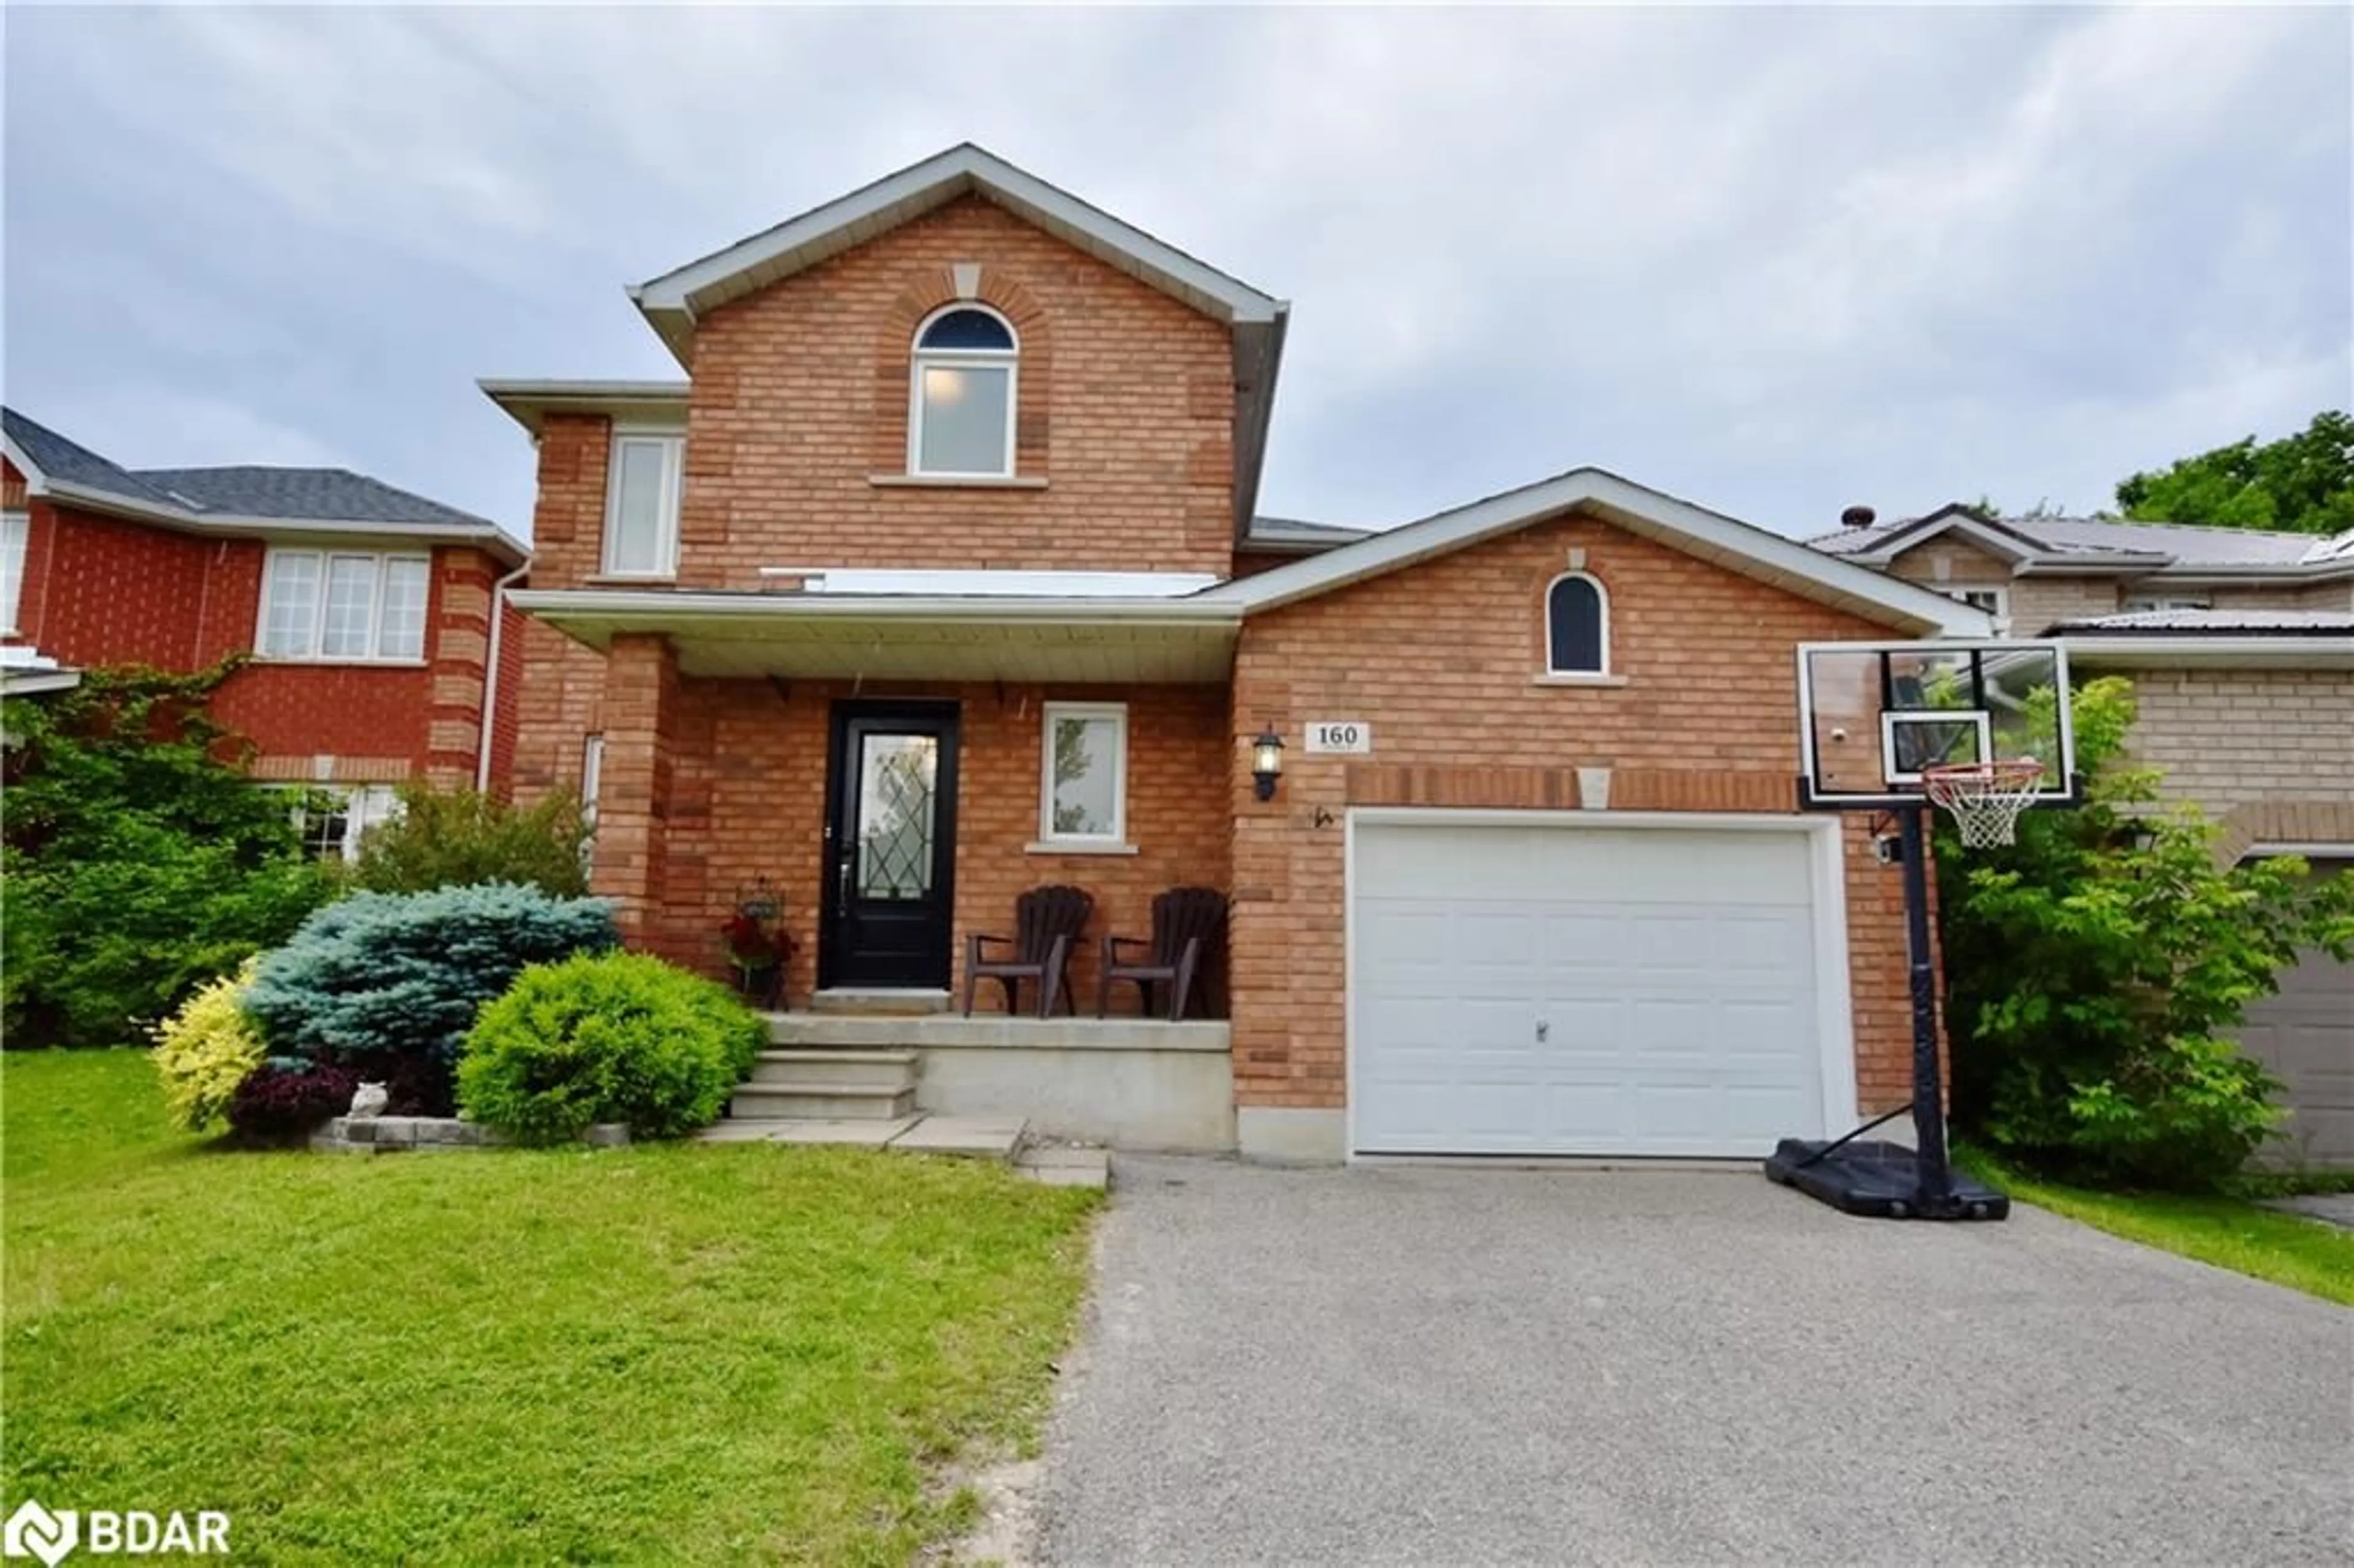 Home with brick exterior material for 160 Esther Dr, Barrie Ontario L4N 9T1